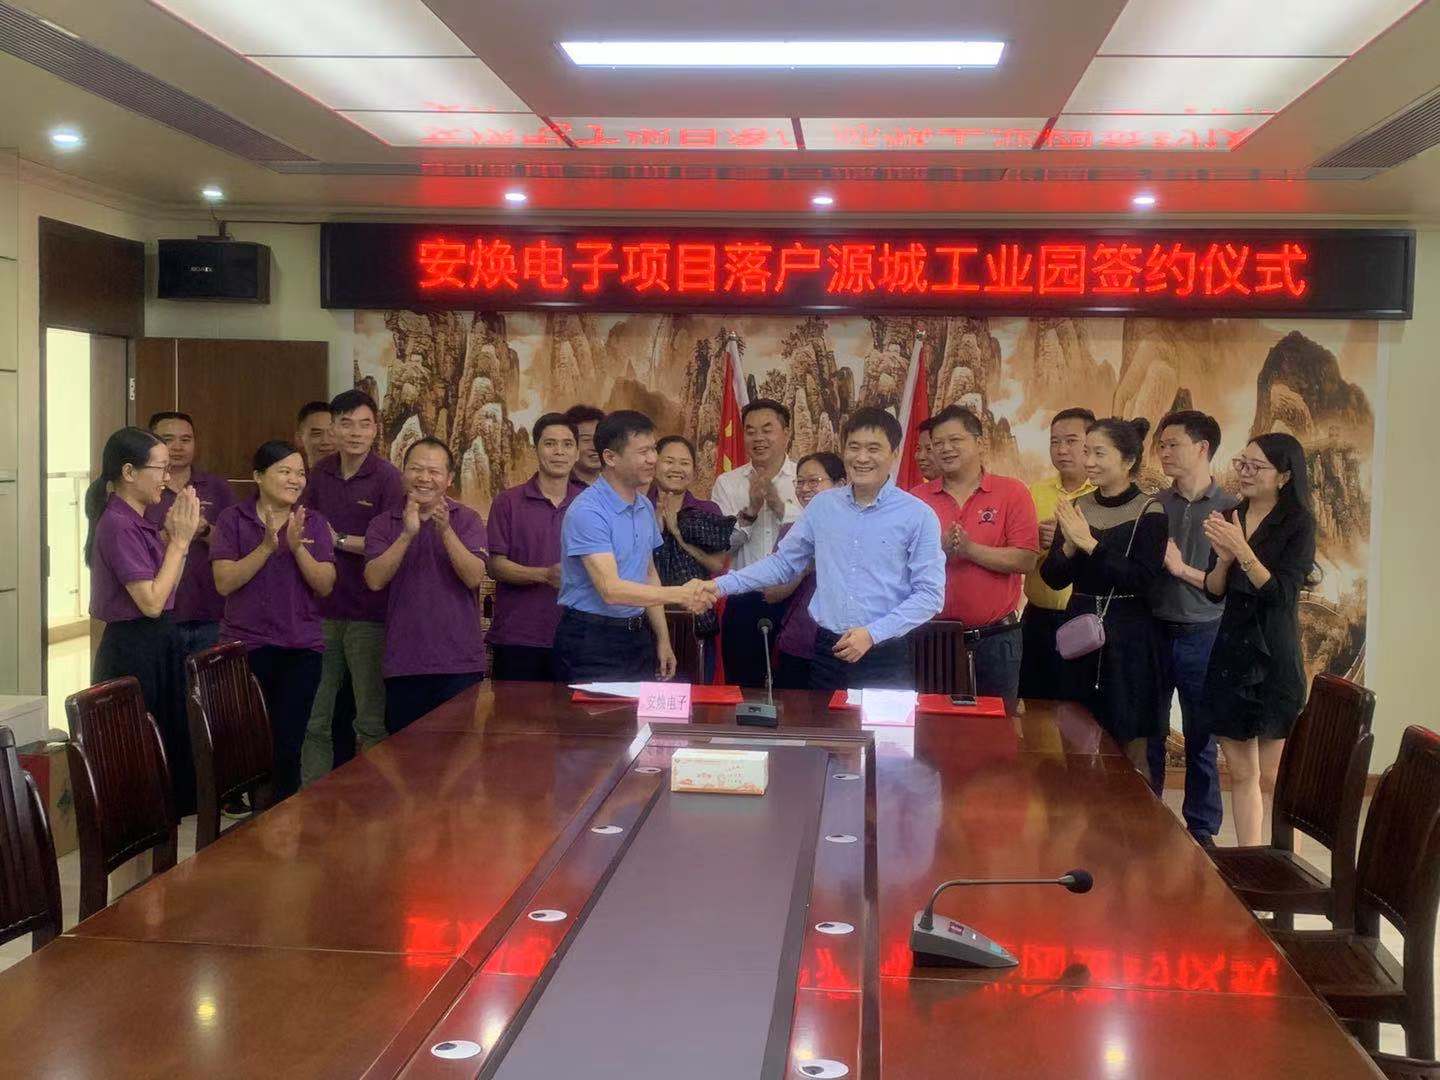 Contract signed for the new site of An Huan in He Yuan City